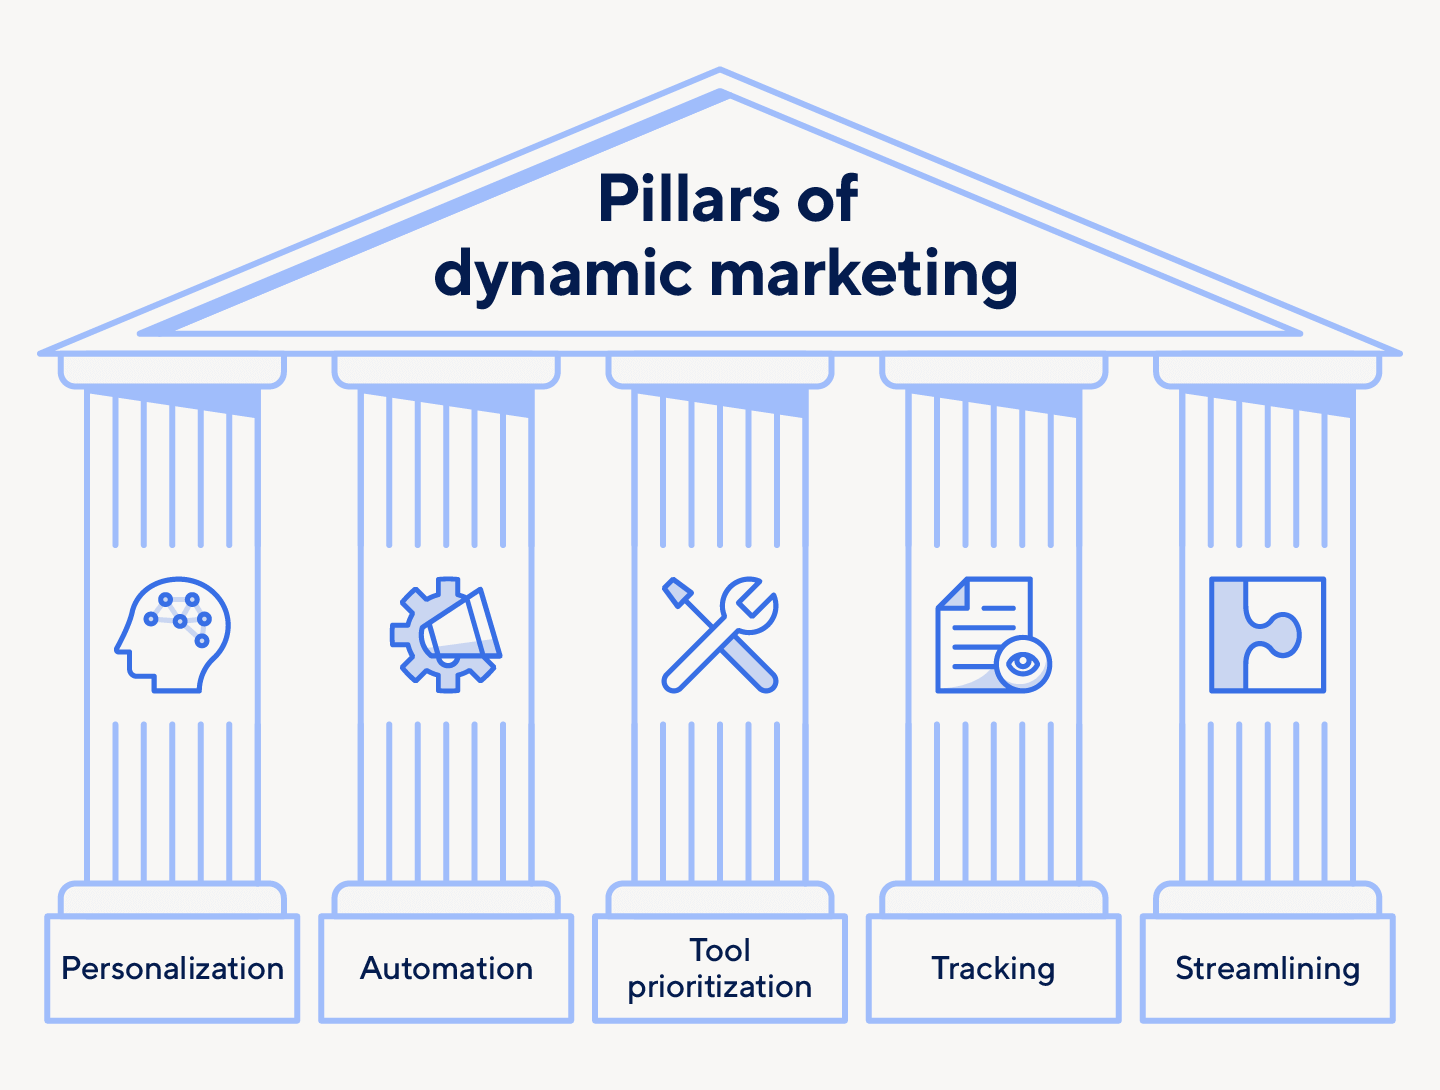 The pillars of dynamic marketing include personalization and automation.